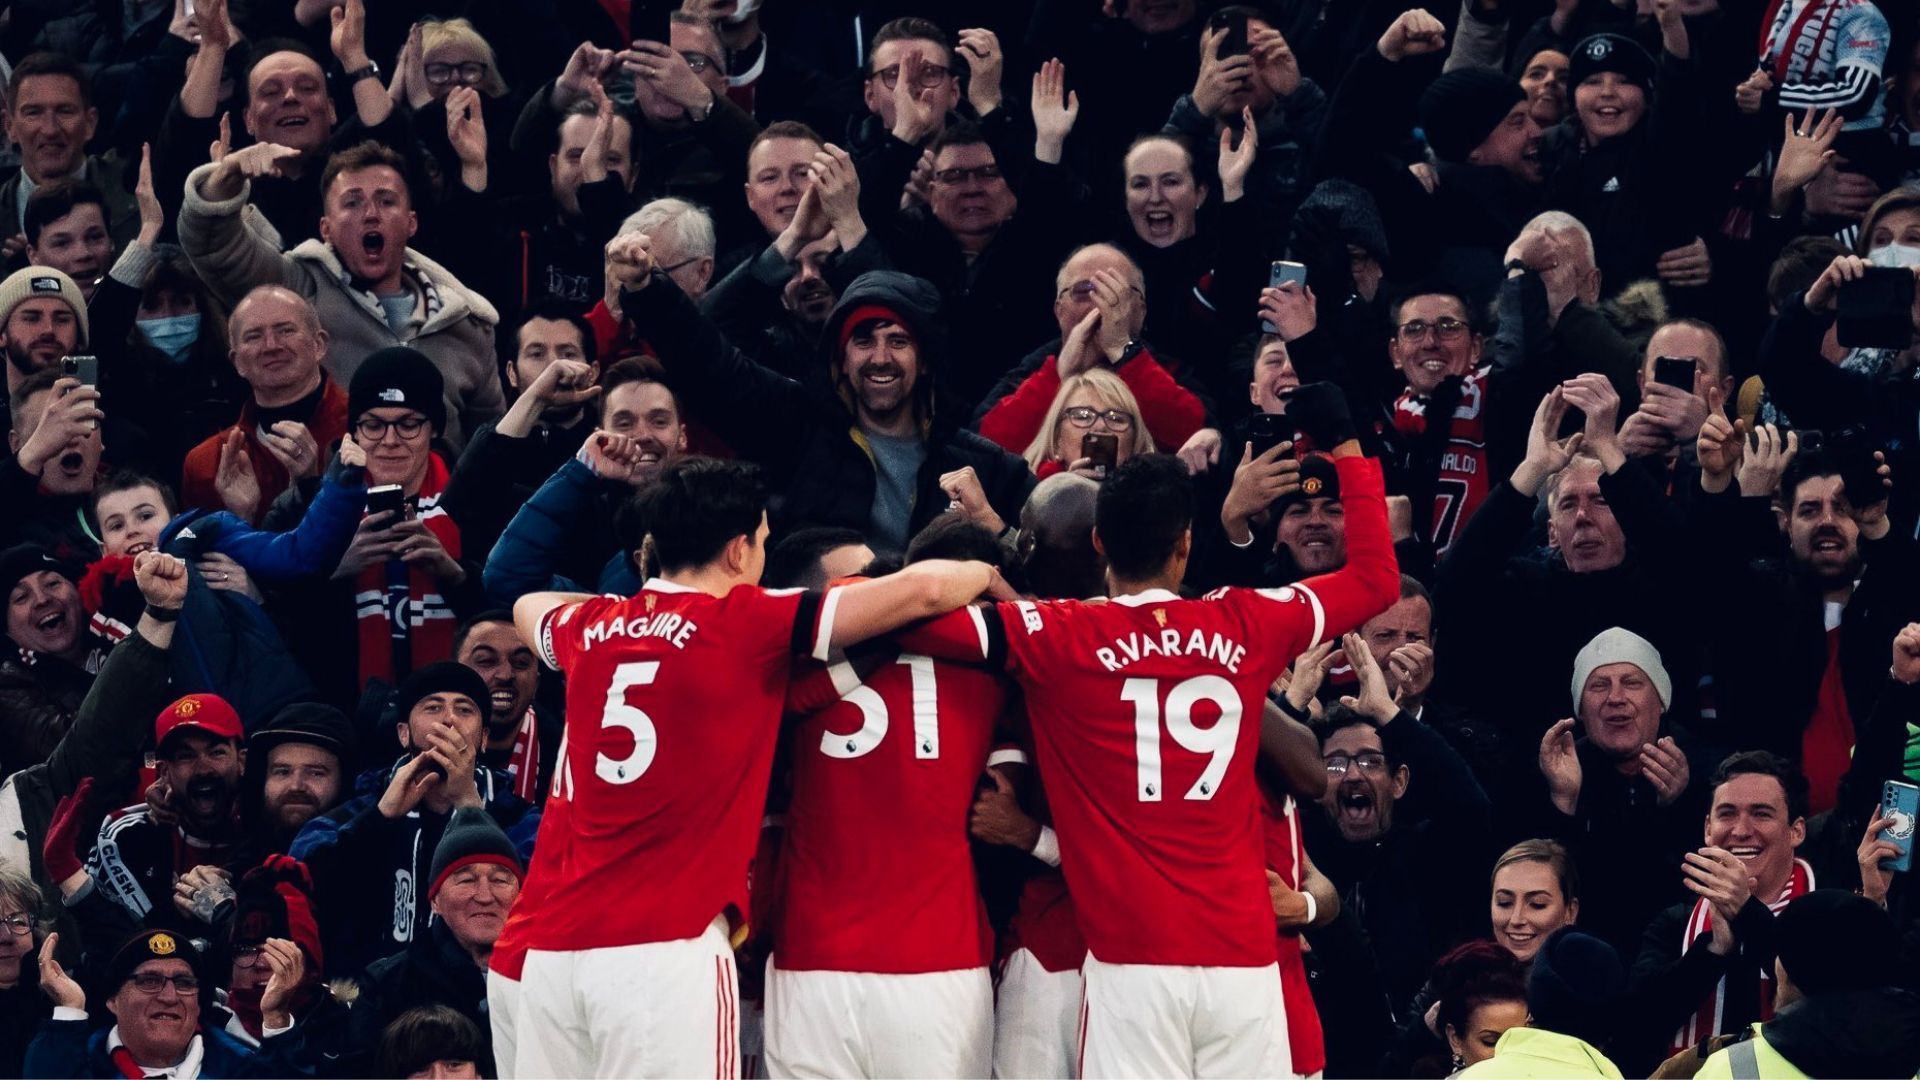 Manchester United played Tottenham Hotspur this Saturday in the English Premier League